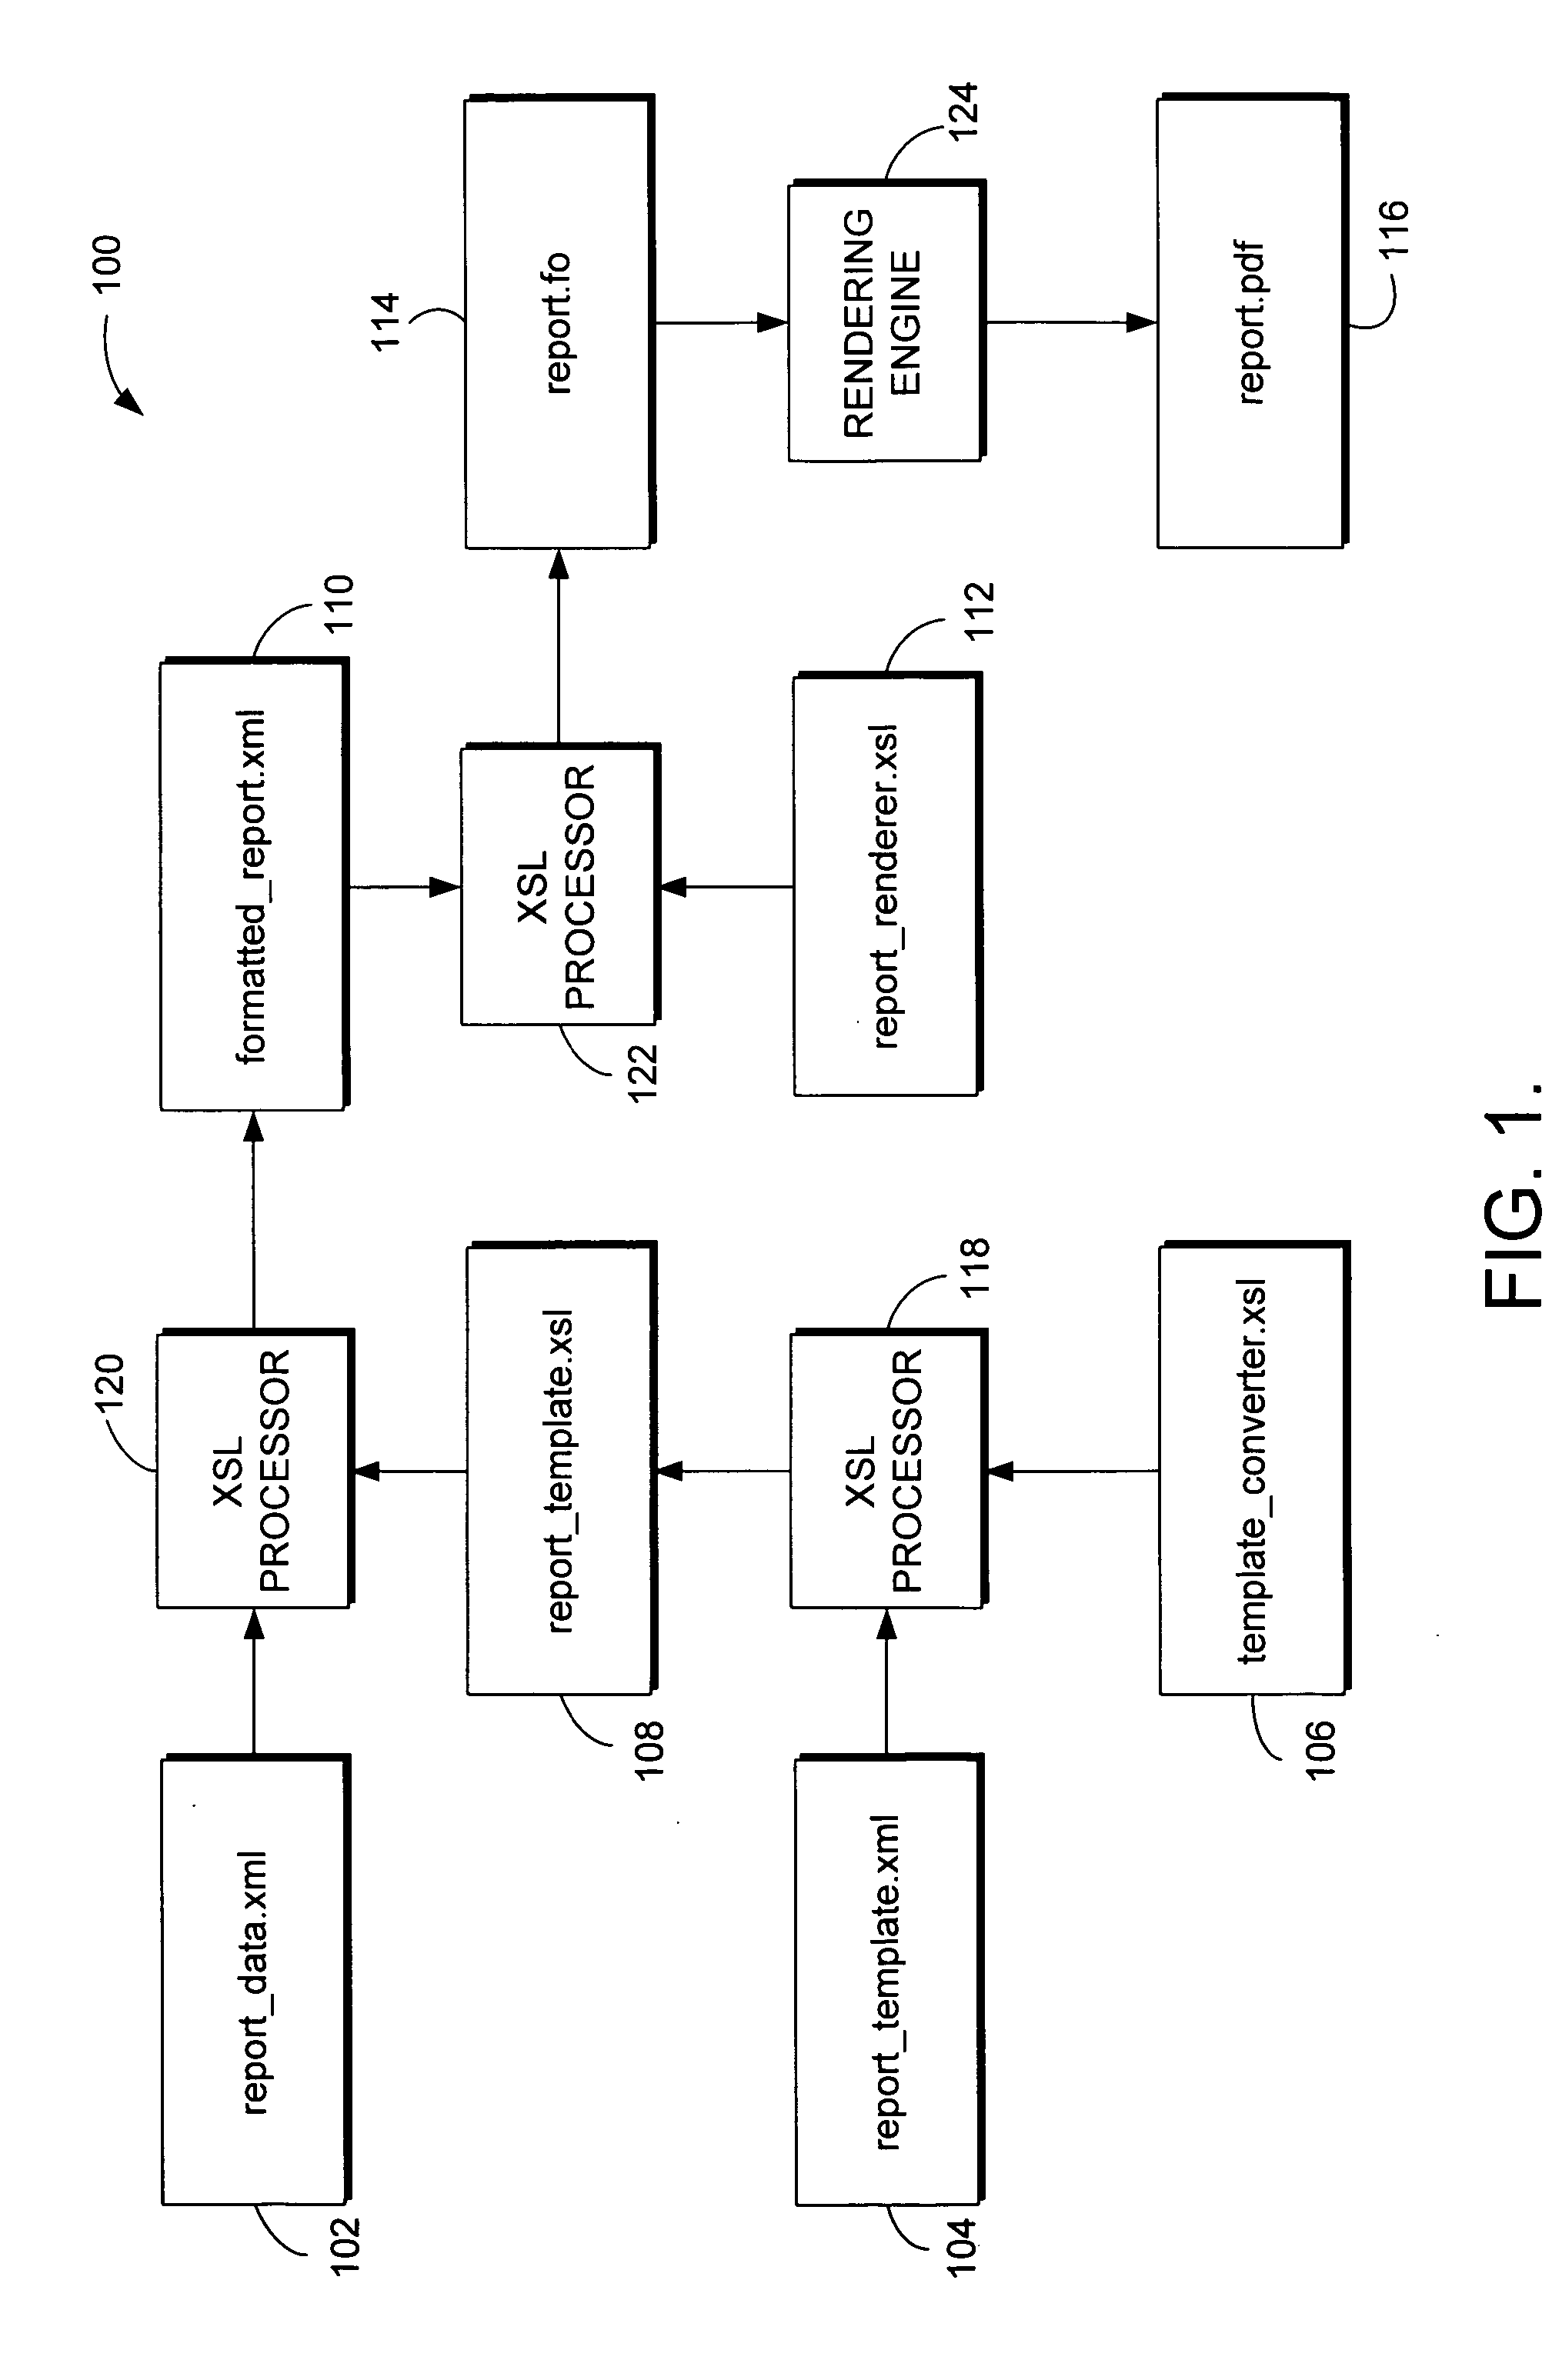 Computerized system and method for rendering reports in a healthcare environment